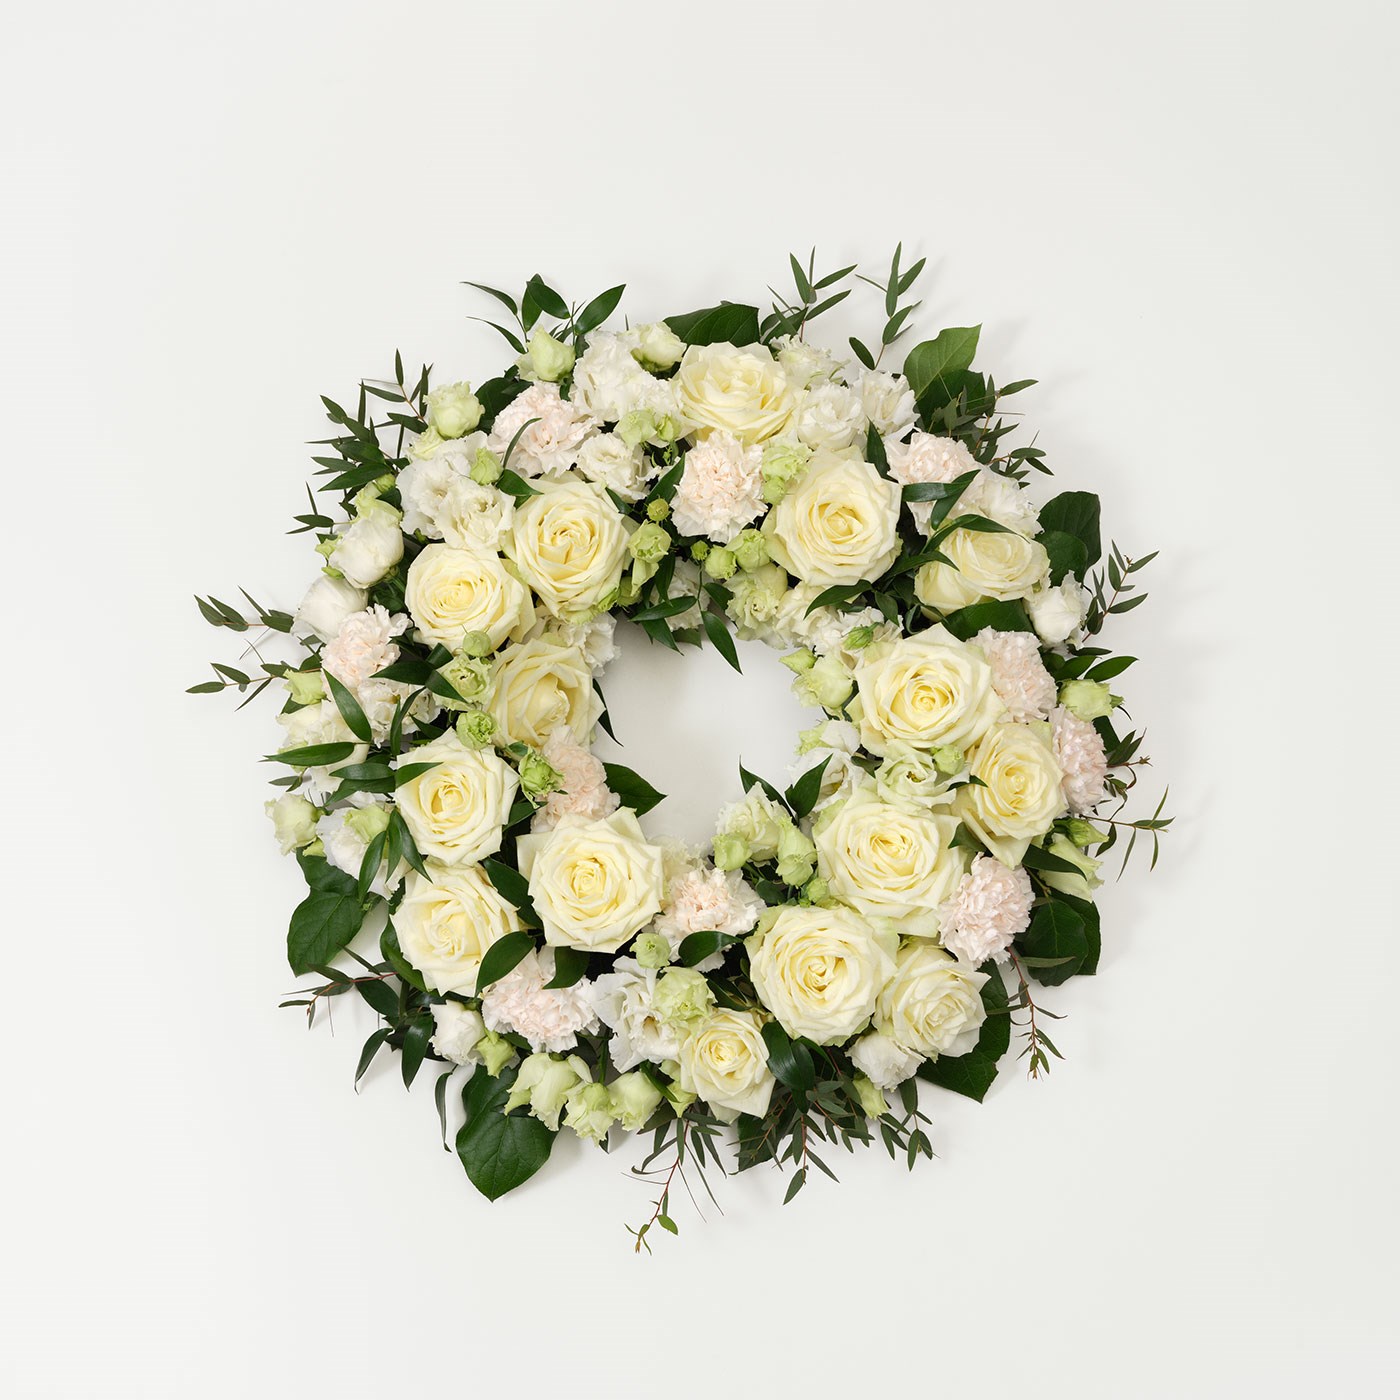 product image for Funeral wreath